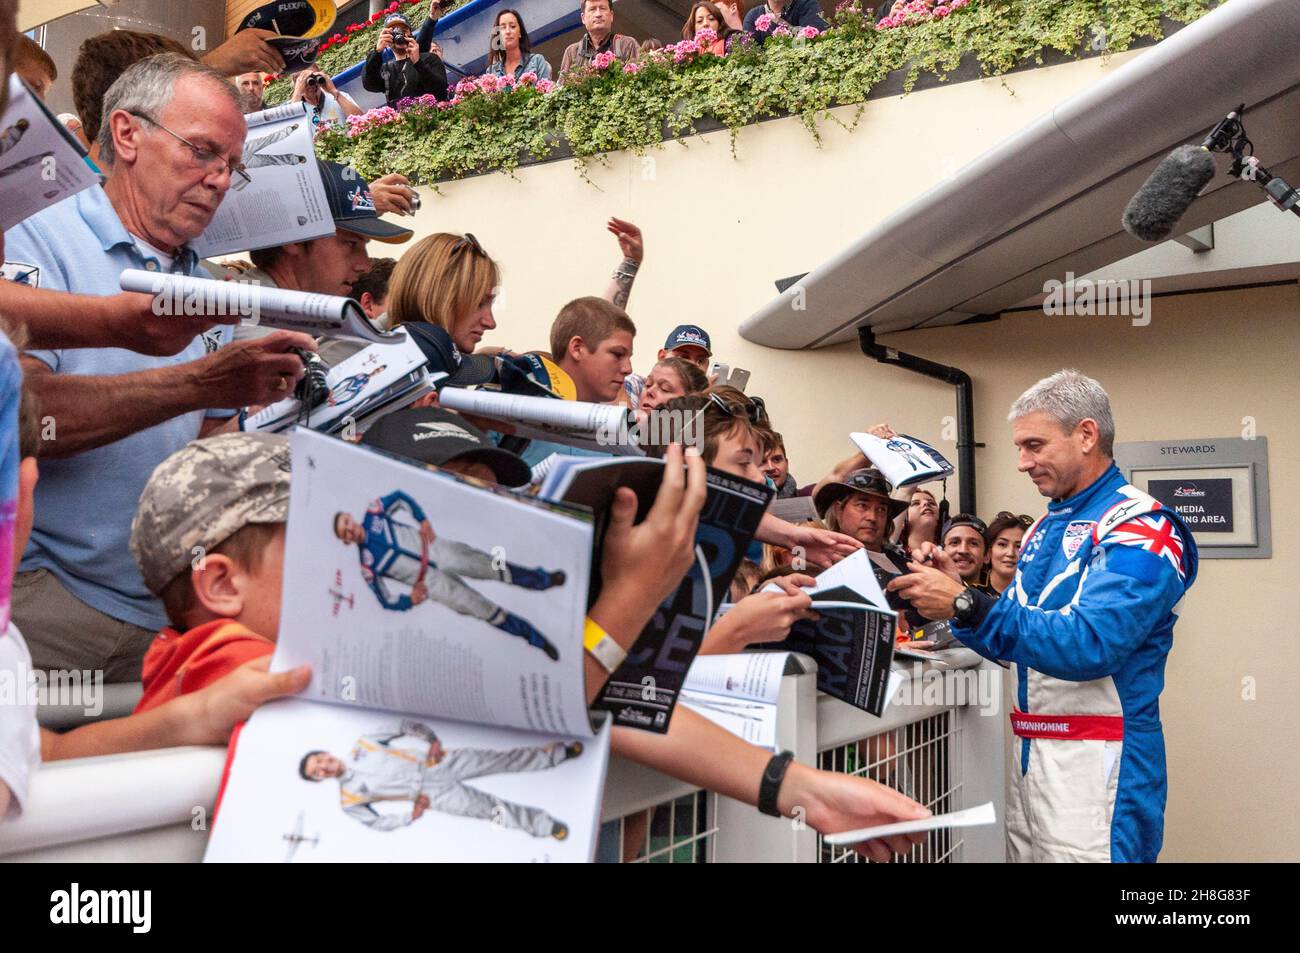 Winner Paul Bonhomme signing autographs after the Red Bull Air Race at Royal Ascot 2015. Autograph hunters. Autographing event programmes. Fans Stock Photo